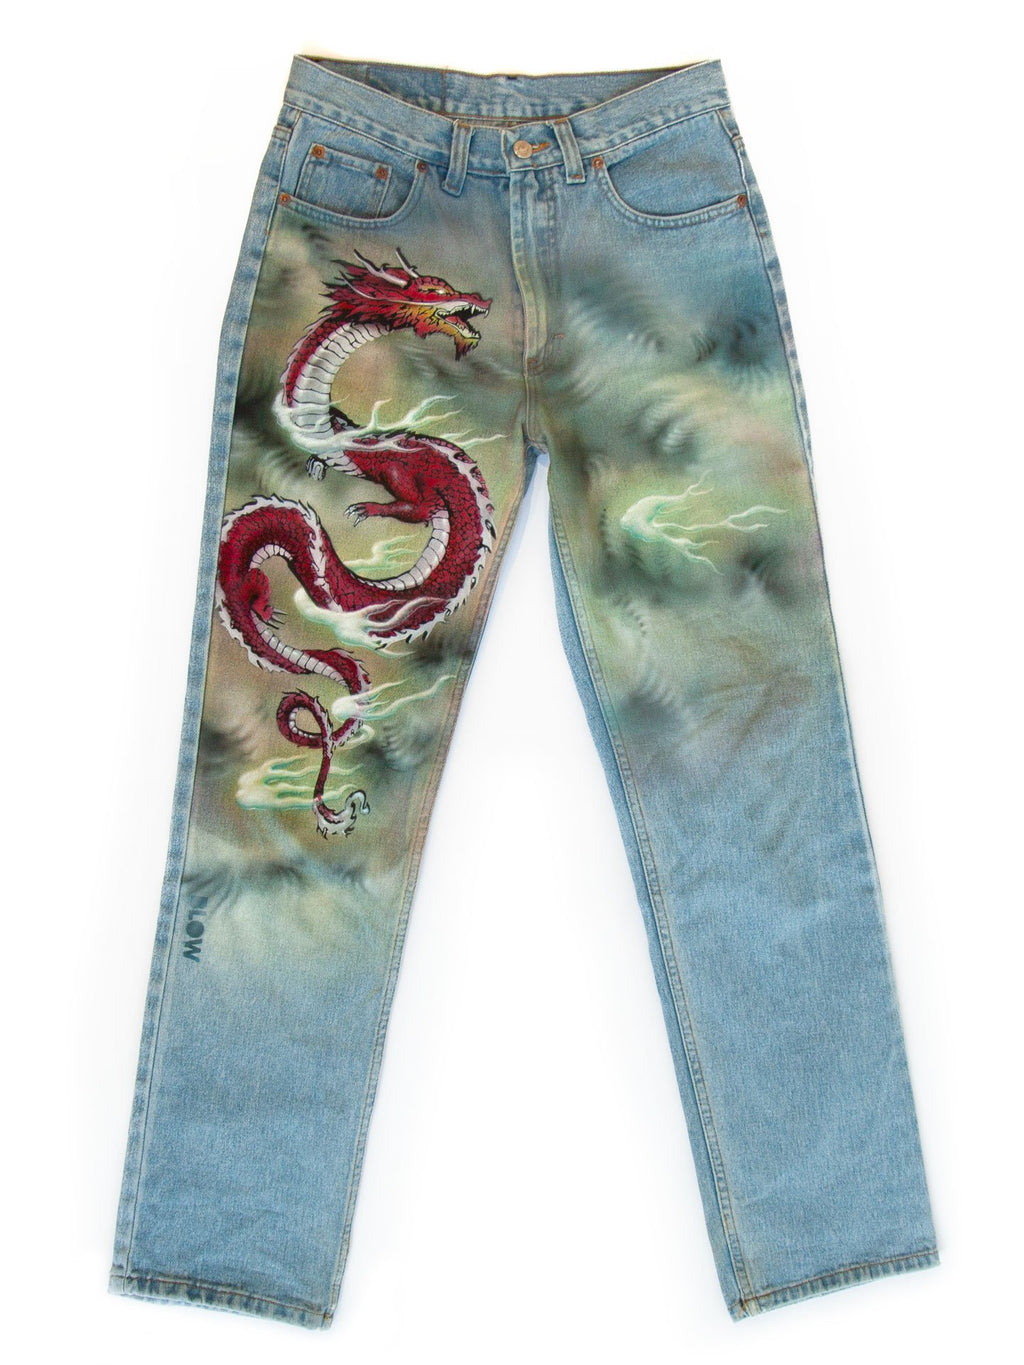 STORM DRAGON - Upcycled blue denim jeans - BLOW London